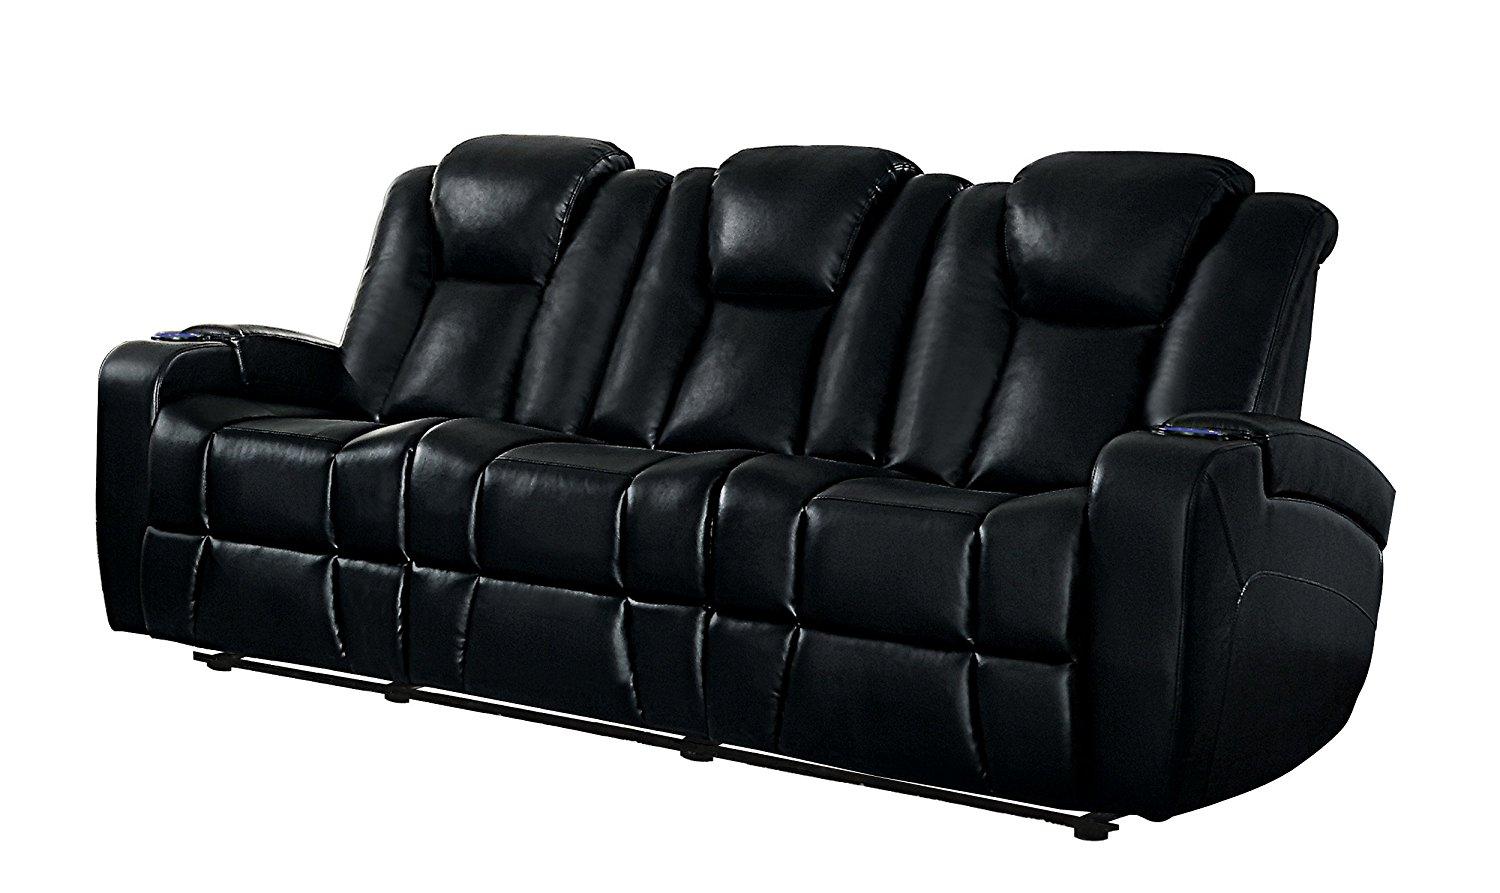 Contemporary Reclining Sofa Madoc 8444BLK-3PW-Recliner Sofa in Black Leather Match